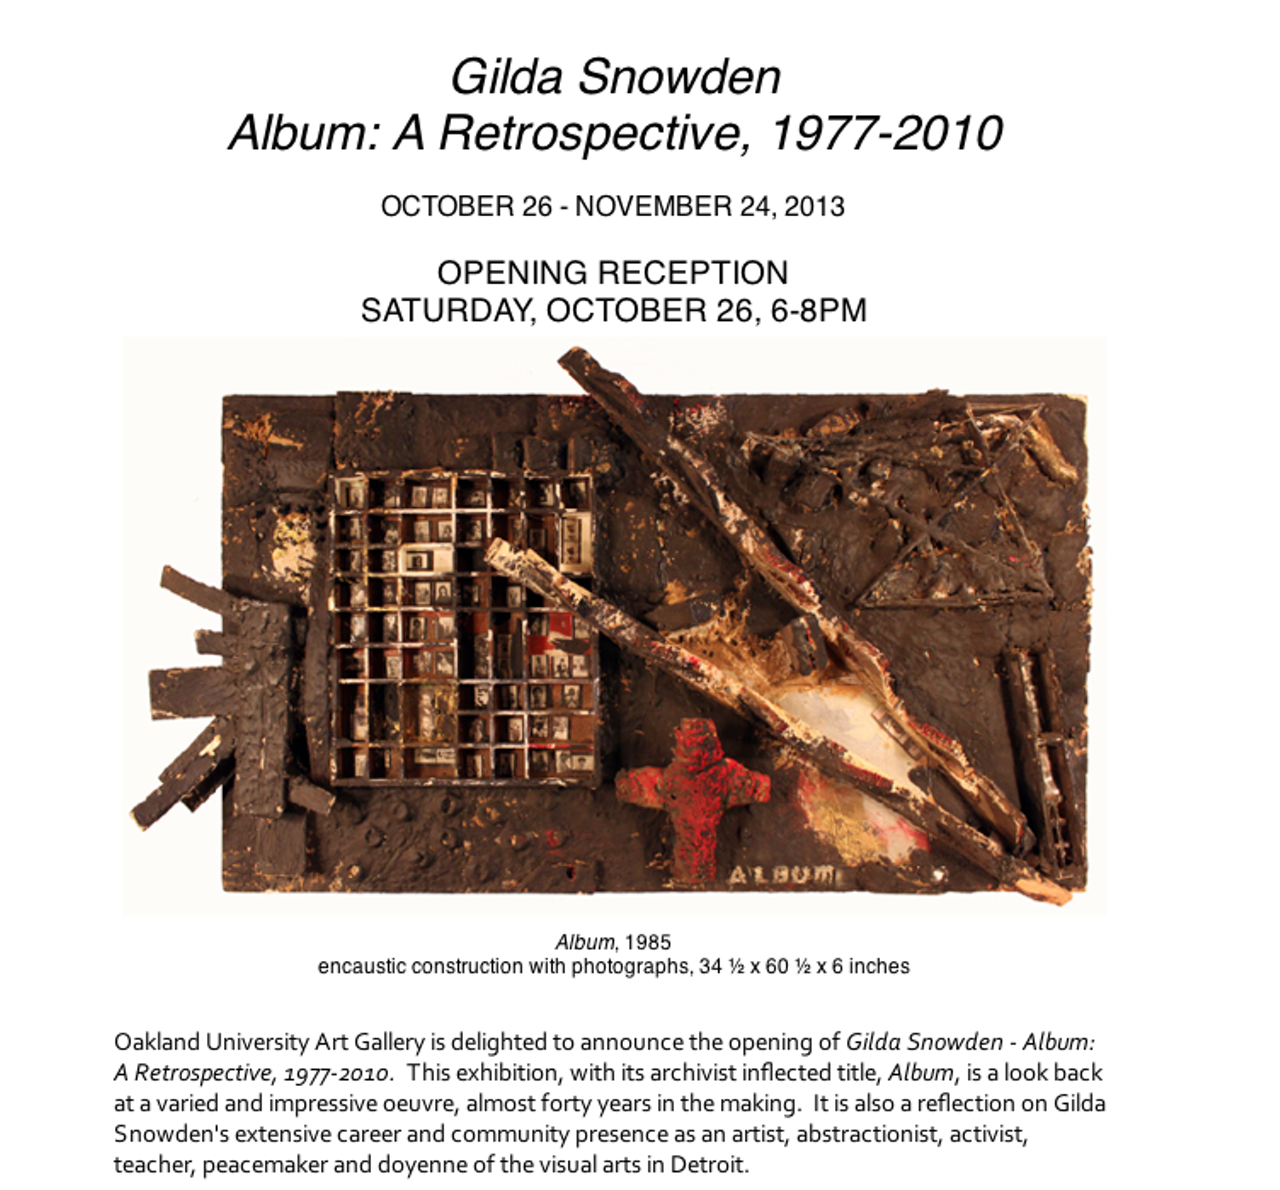 Gilda Snowden: A Retrospective
Artwork spanning from 1977-2010 at the Oakland University Art Gallery. Oct. 26th, 6-8p.m. 2200 N. Squirrel Rd. / 208 Wilson Hall Rochester, Michigan 48309, (248) 370-3005